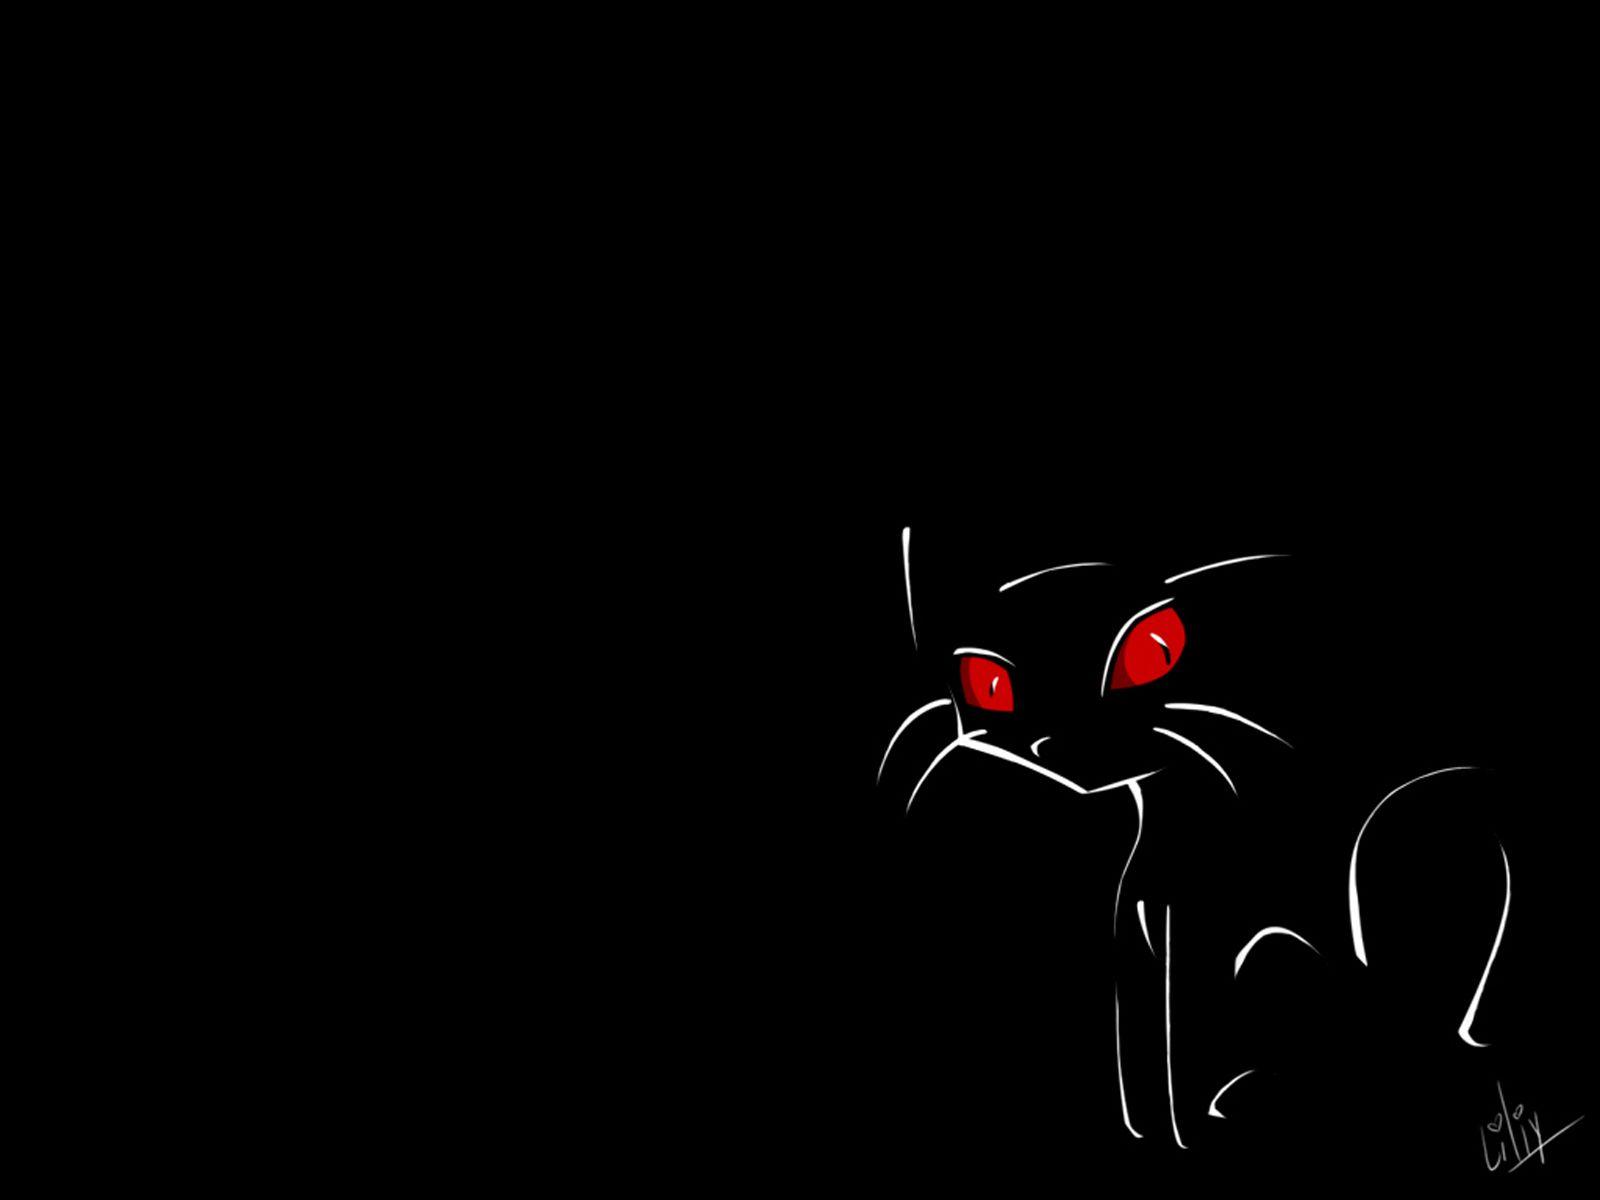 Watch more like Gothic Black Cat Wallpaper